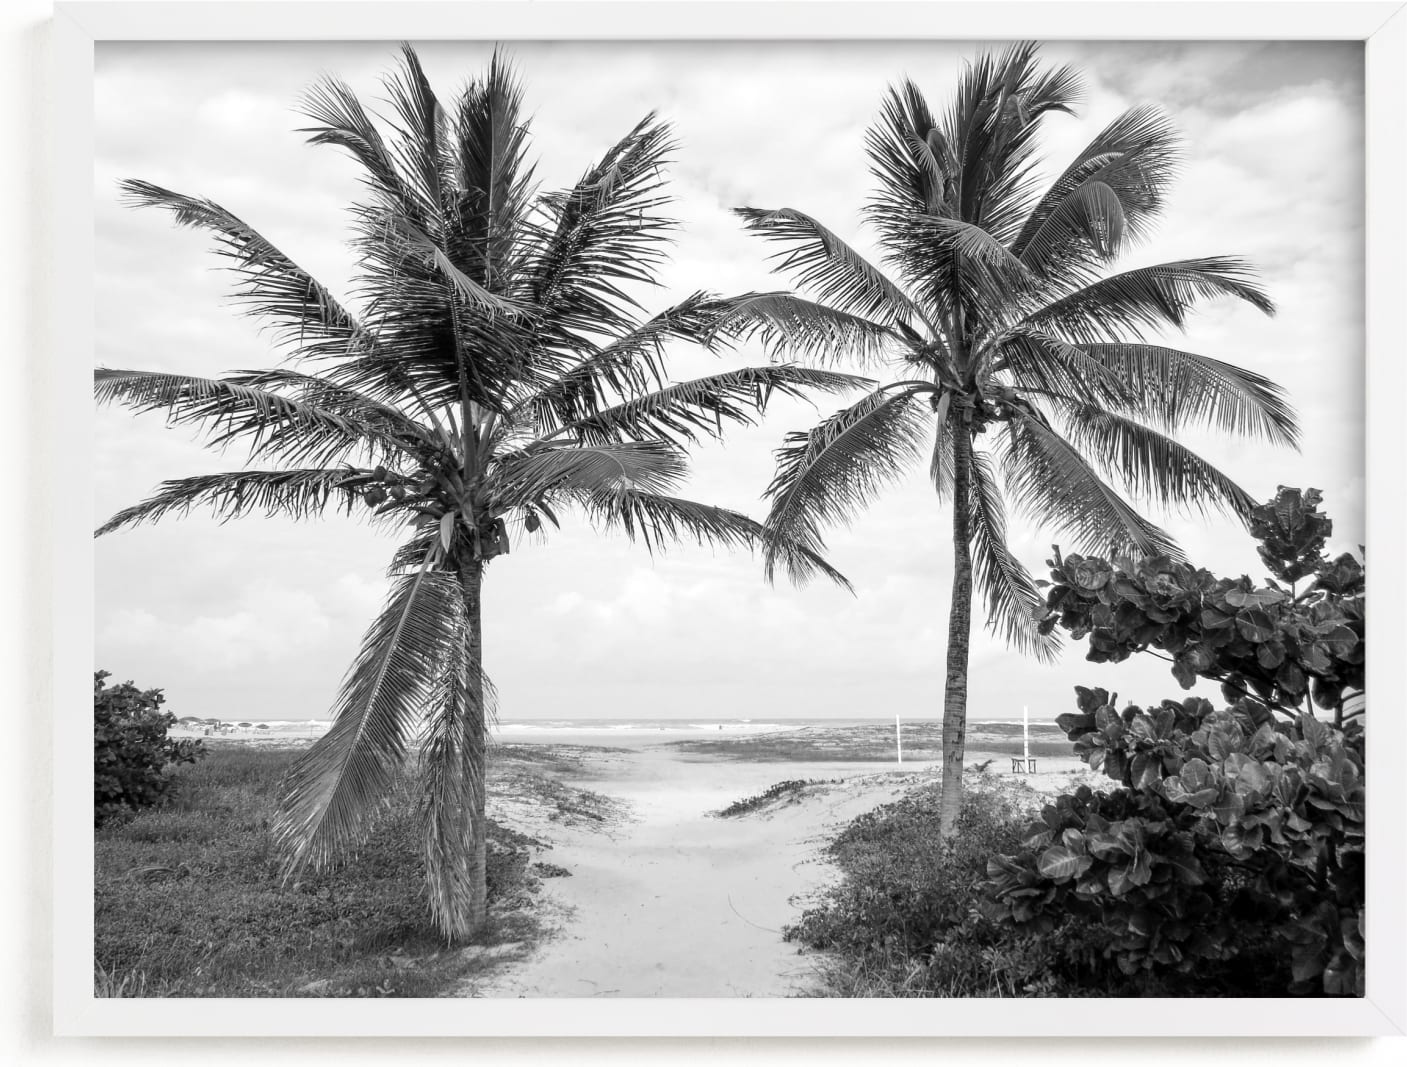 This is a black and white art by Eliane Lamb called Coconut gate.